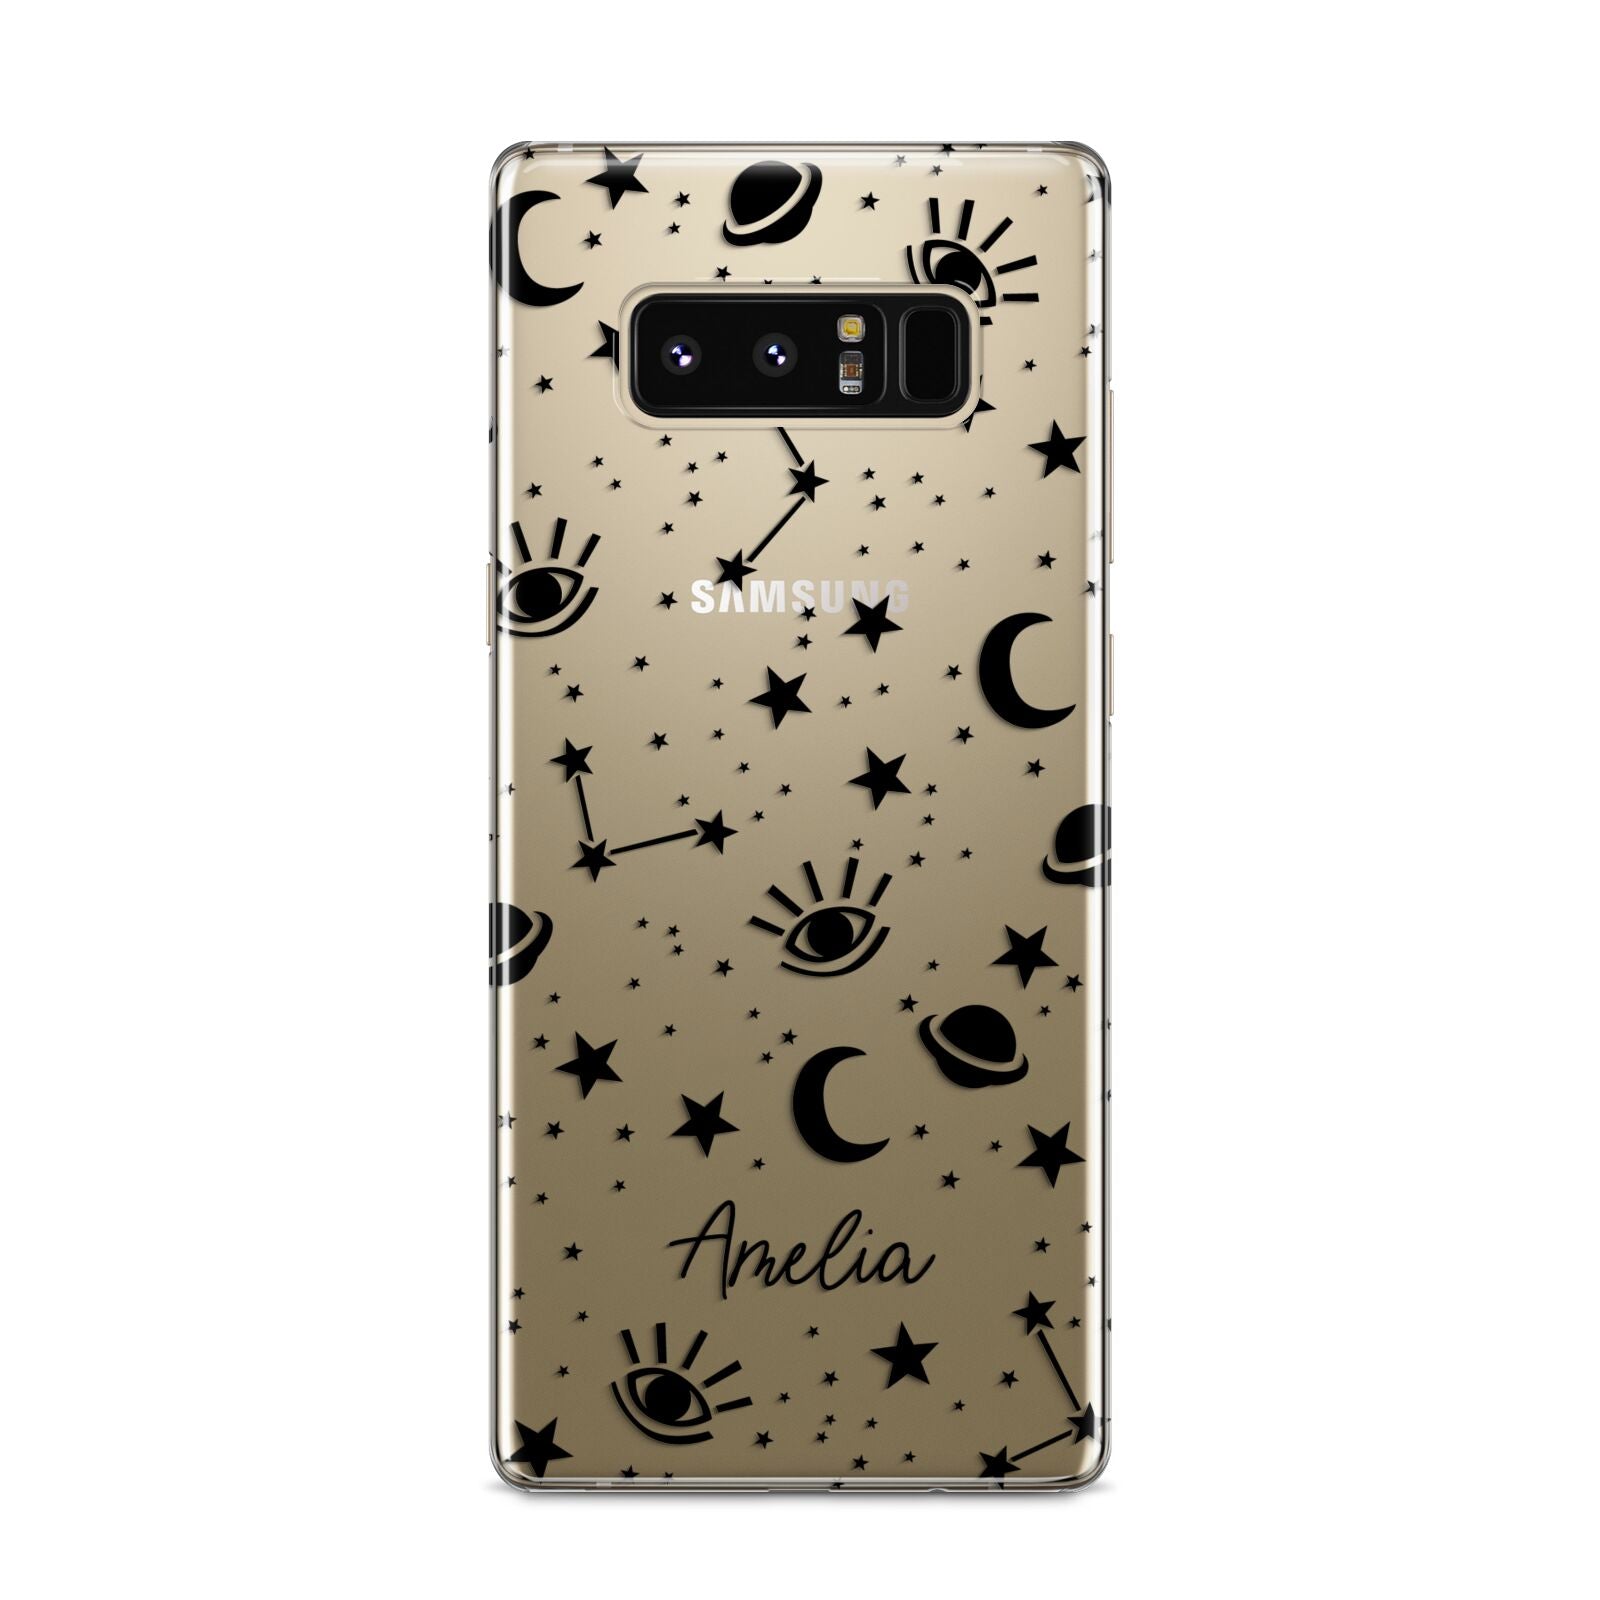 Monochrome Zodiac Constellations with Name Samsung Galaxy S8 Case